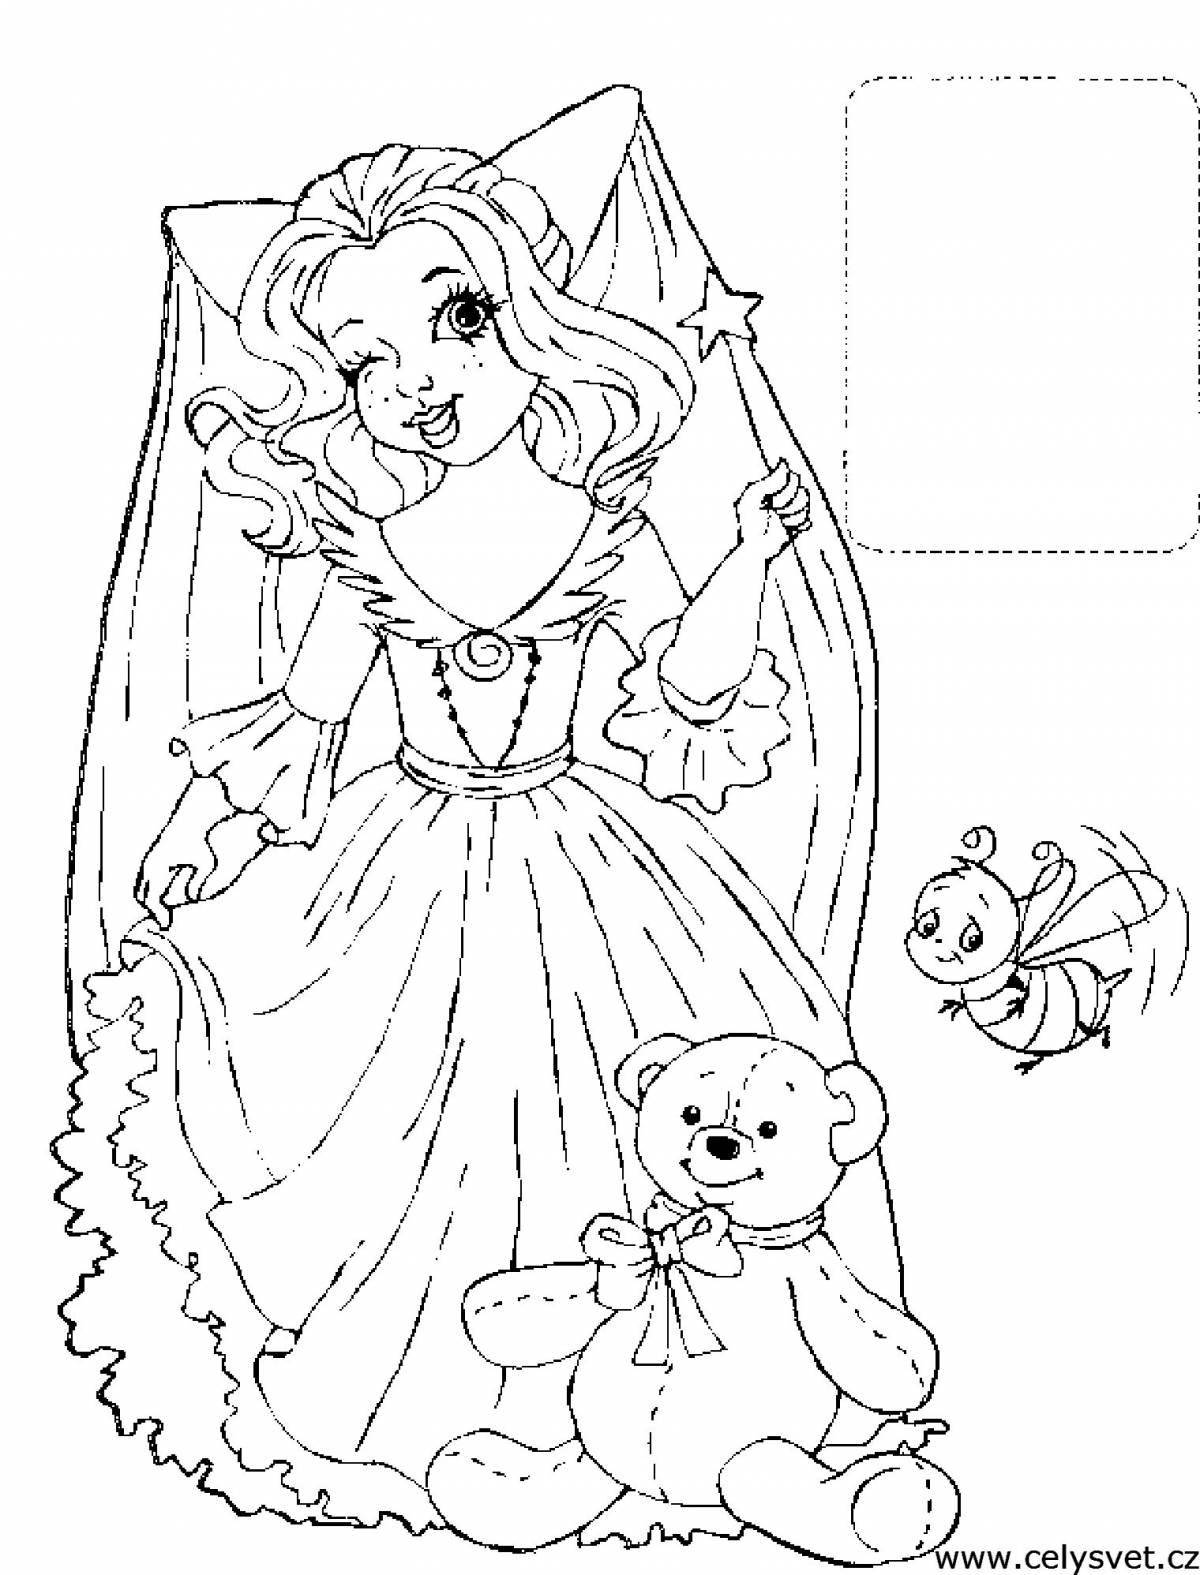 Fairytale coloring book for children 5-6 years old for girls princess